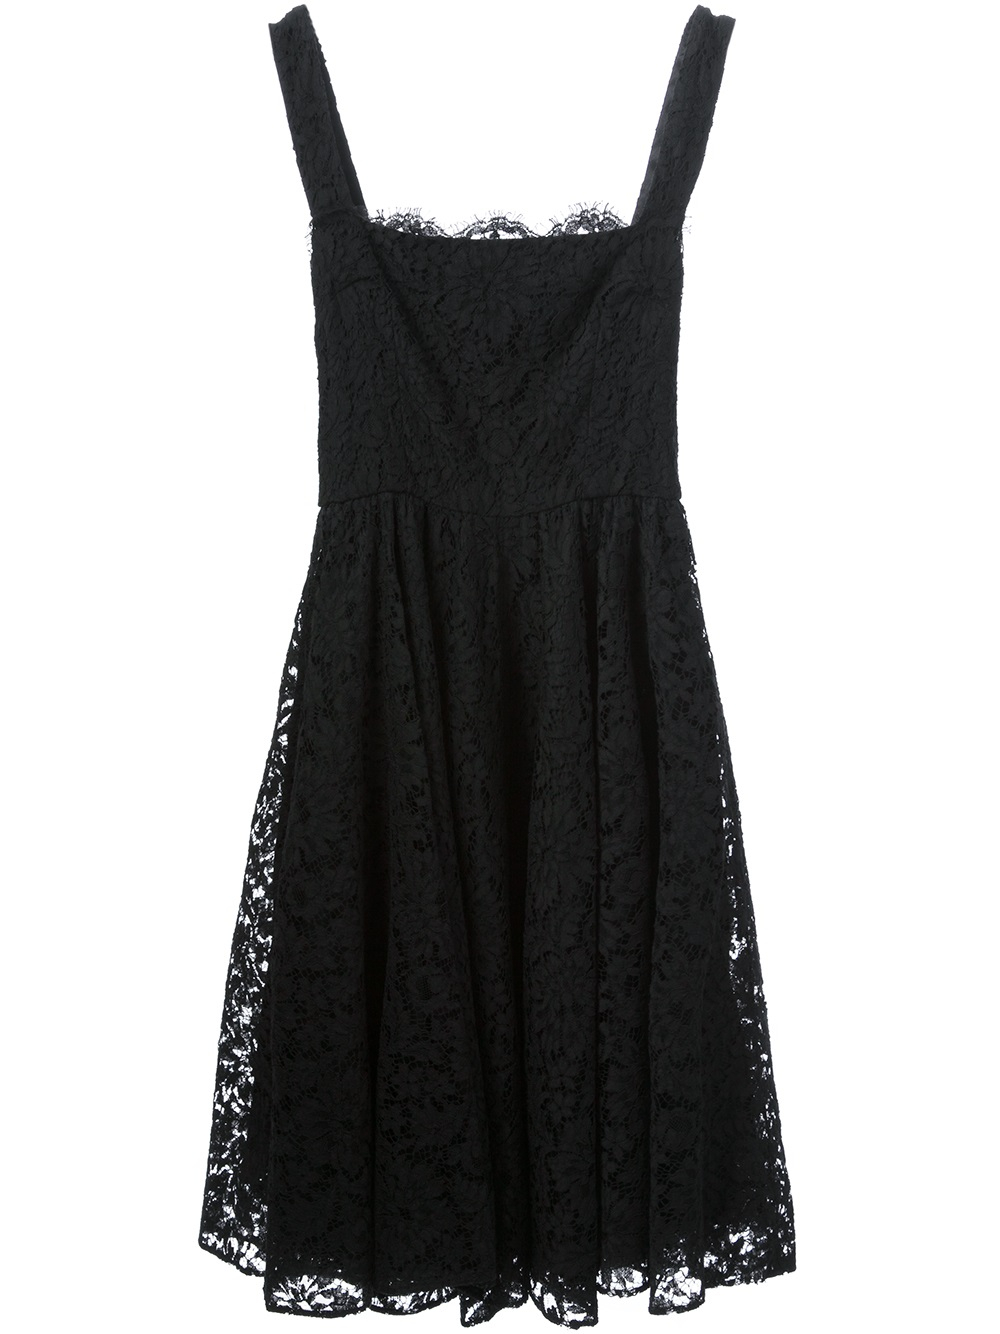 Lyst - Dolce & Gabbana Floral Lace Flared Dress in Black